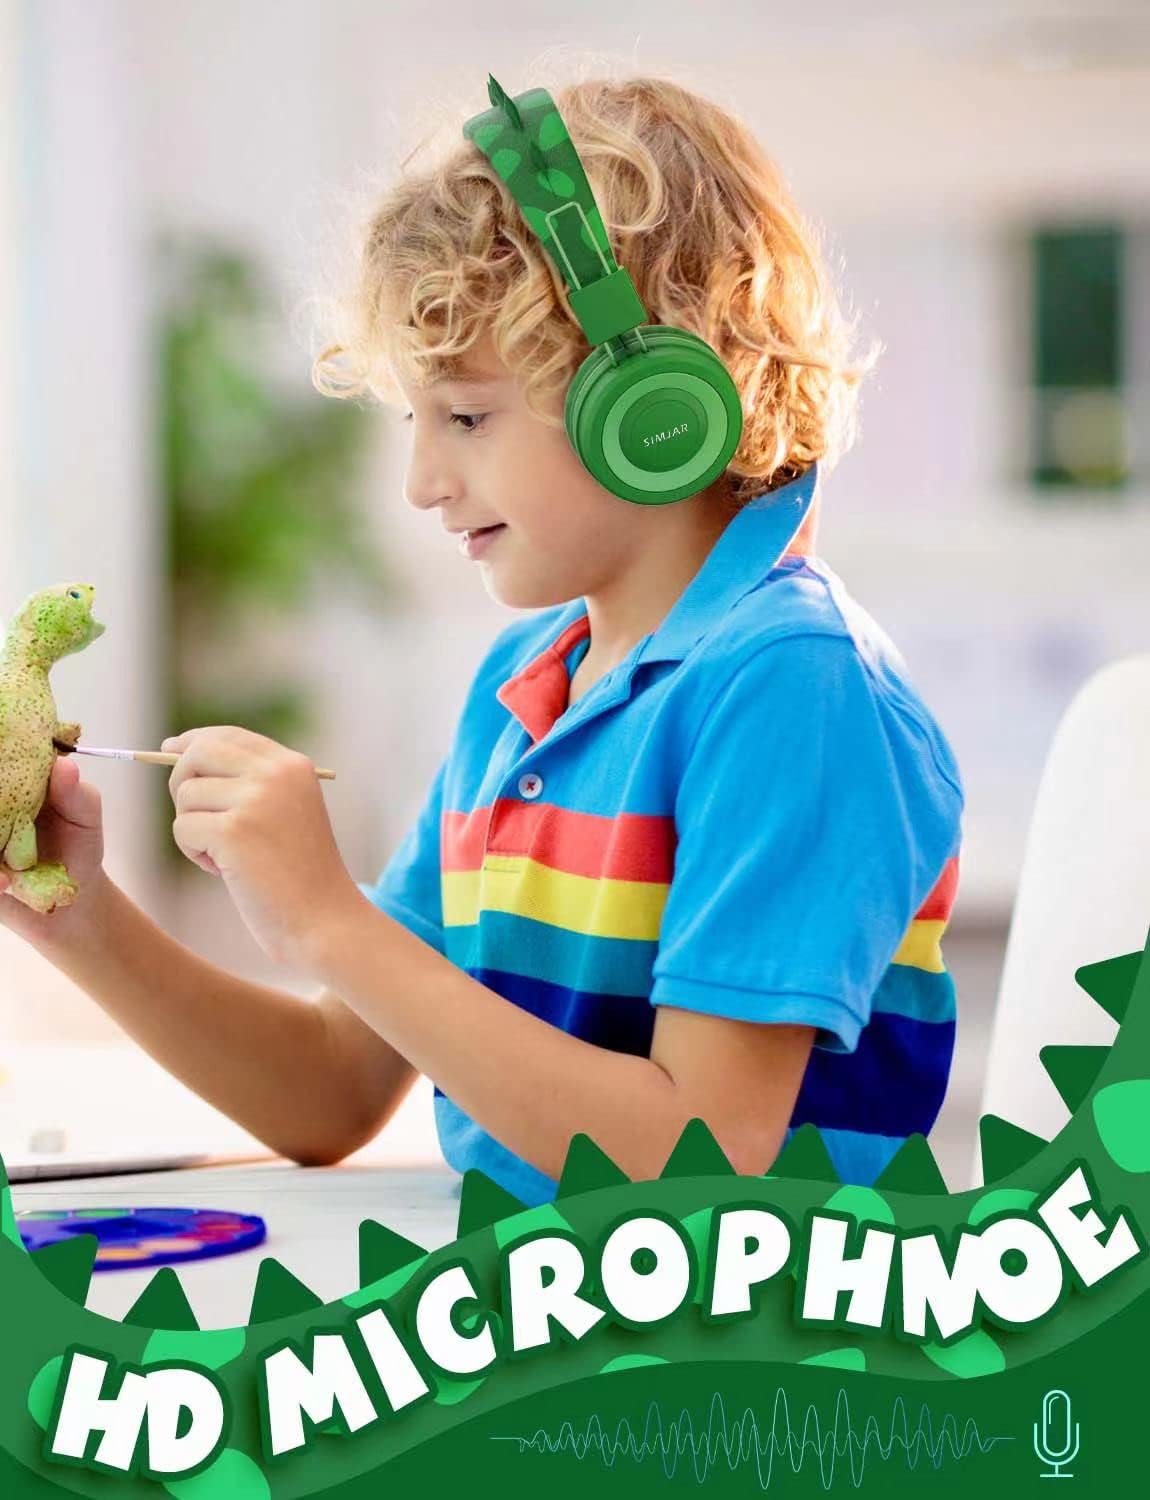 SIMJAR Dinosaur Kids Headphones with Microphone for School, Volume Limiter 85/94dB, Over-Ear Girls Boys Headphones for Kids with Foldable Wired Headphones for iPad/Travel/Tablet